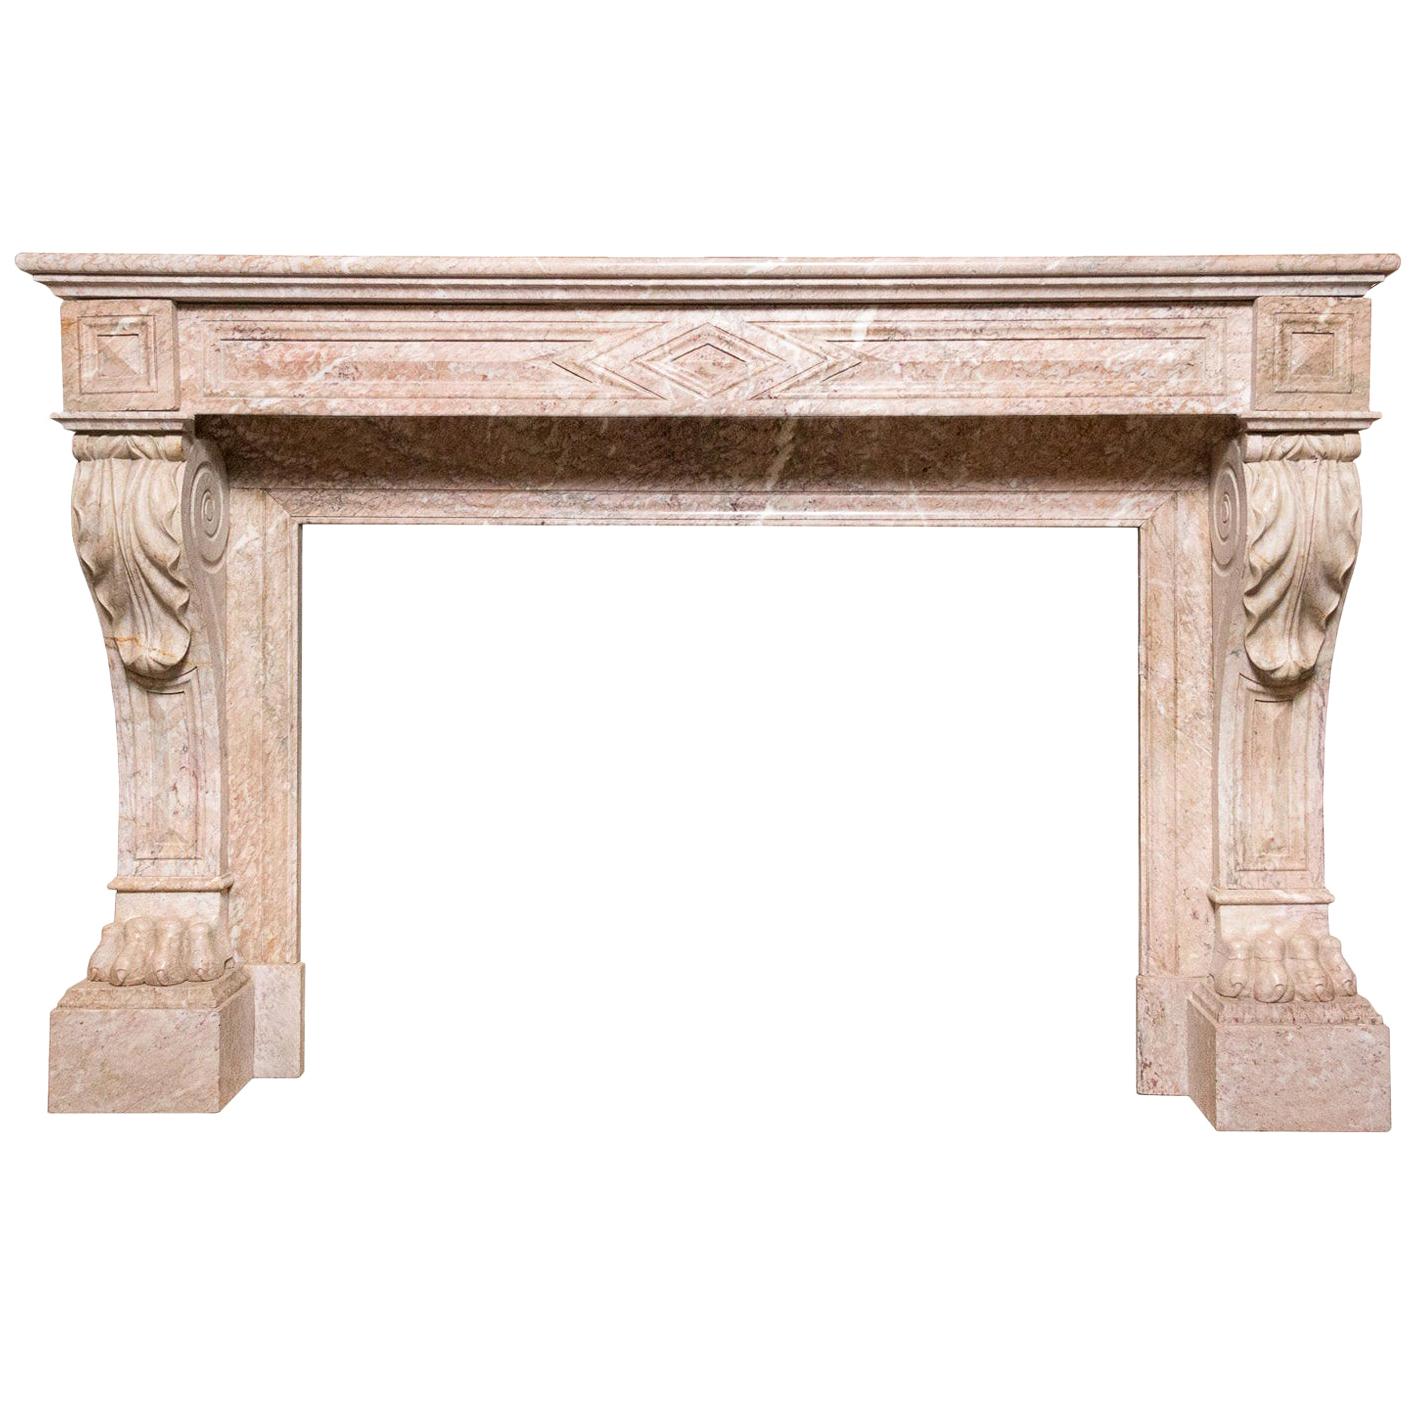 Louis Philippe Period Marble Empire Style Mantel For Sale